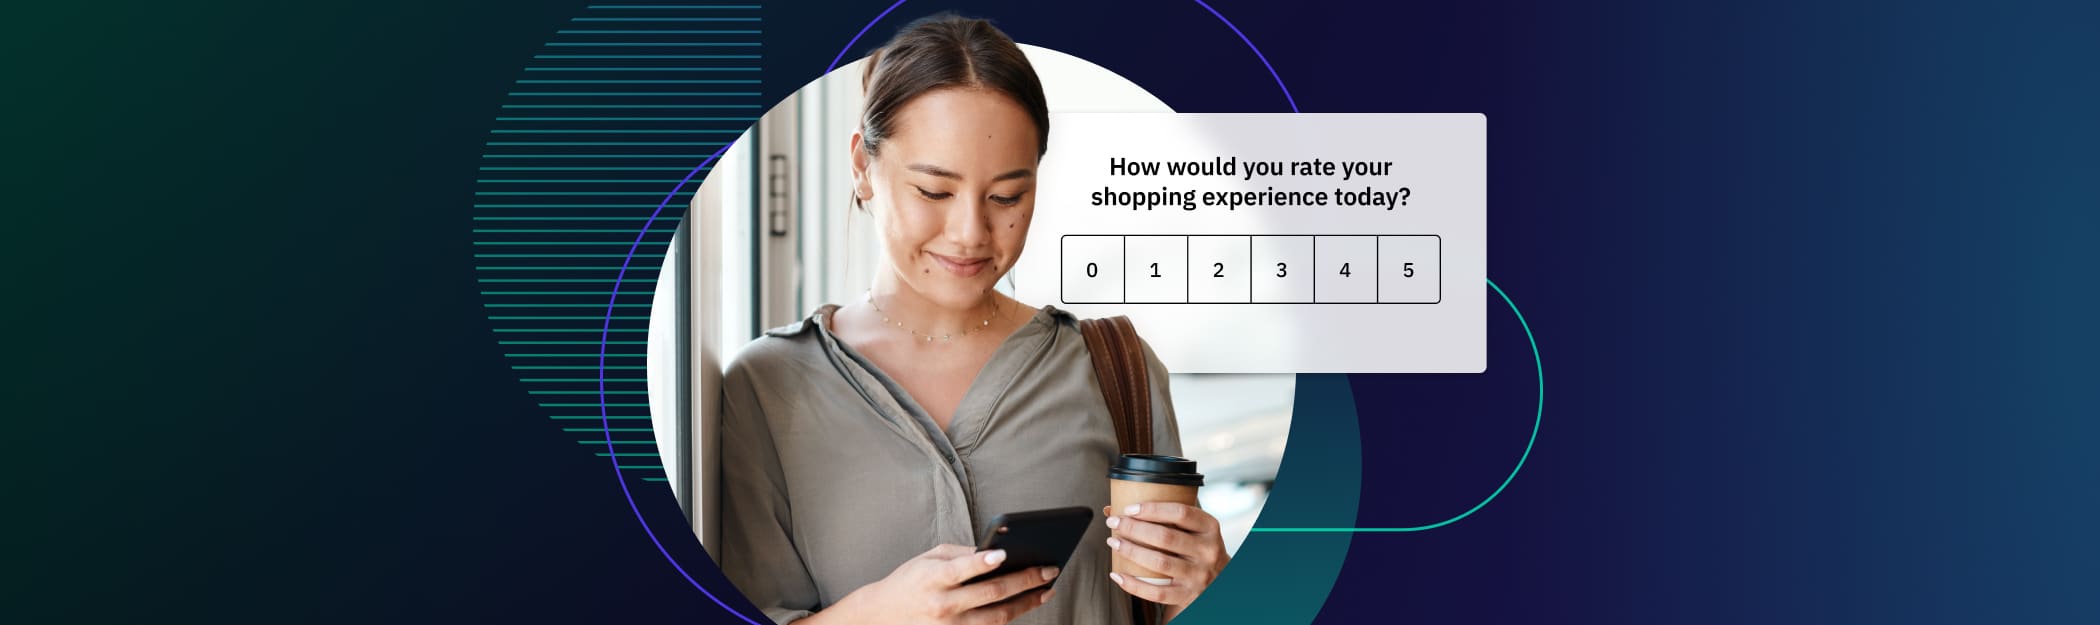 In-Moment Surveys: A Smarter Way to Turn Customer Insights into Action